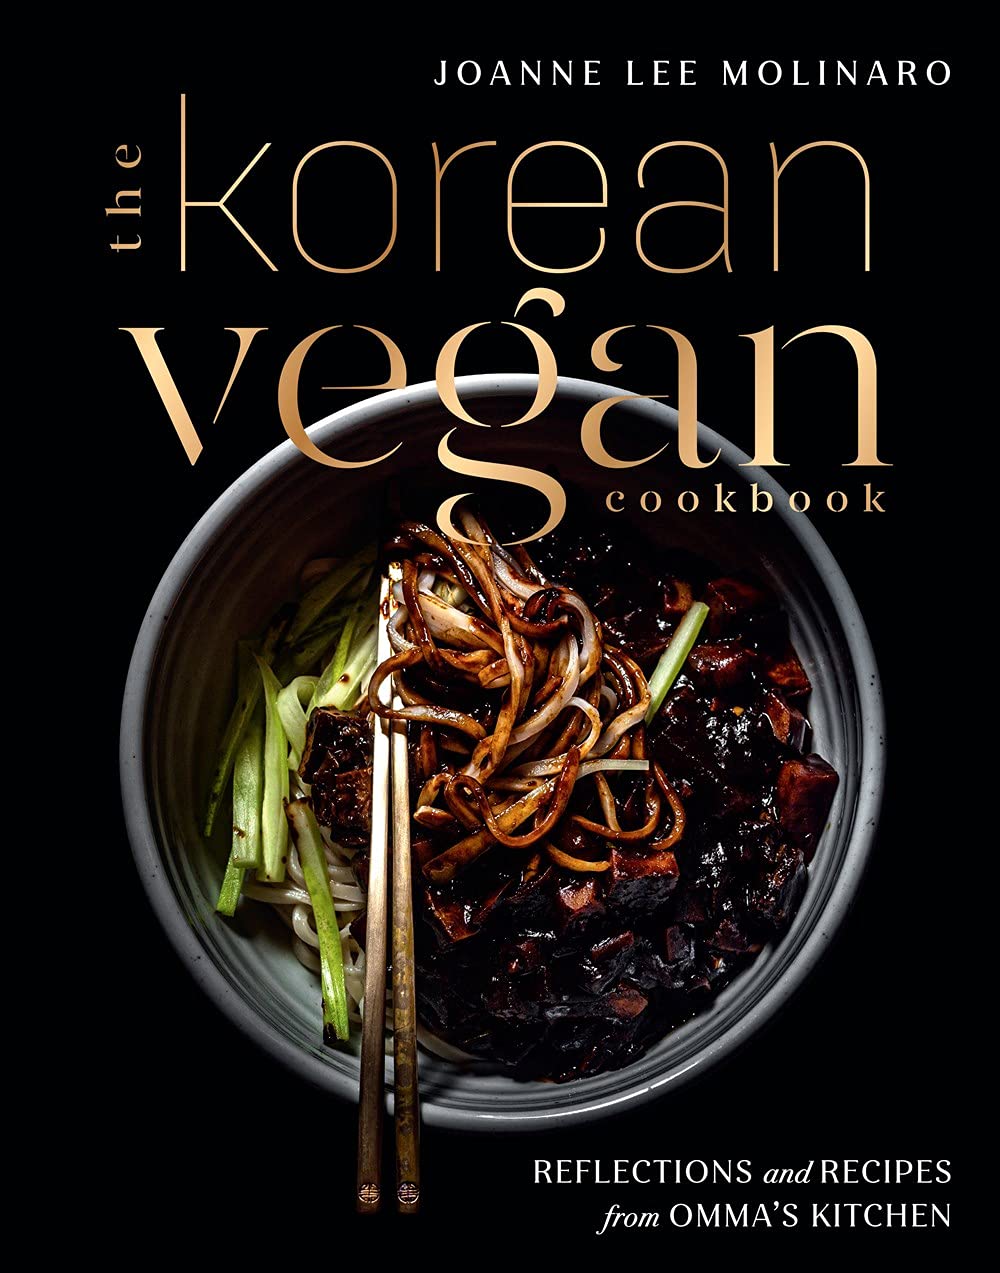 The Korean Vegan Cookbook: Reflections and Recipes from Omma's Kitchen (Joanne Lee Molinaro)